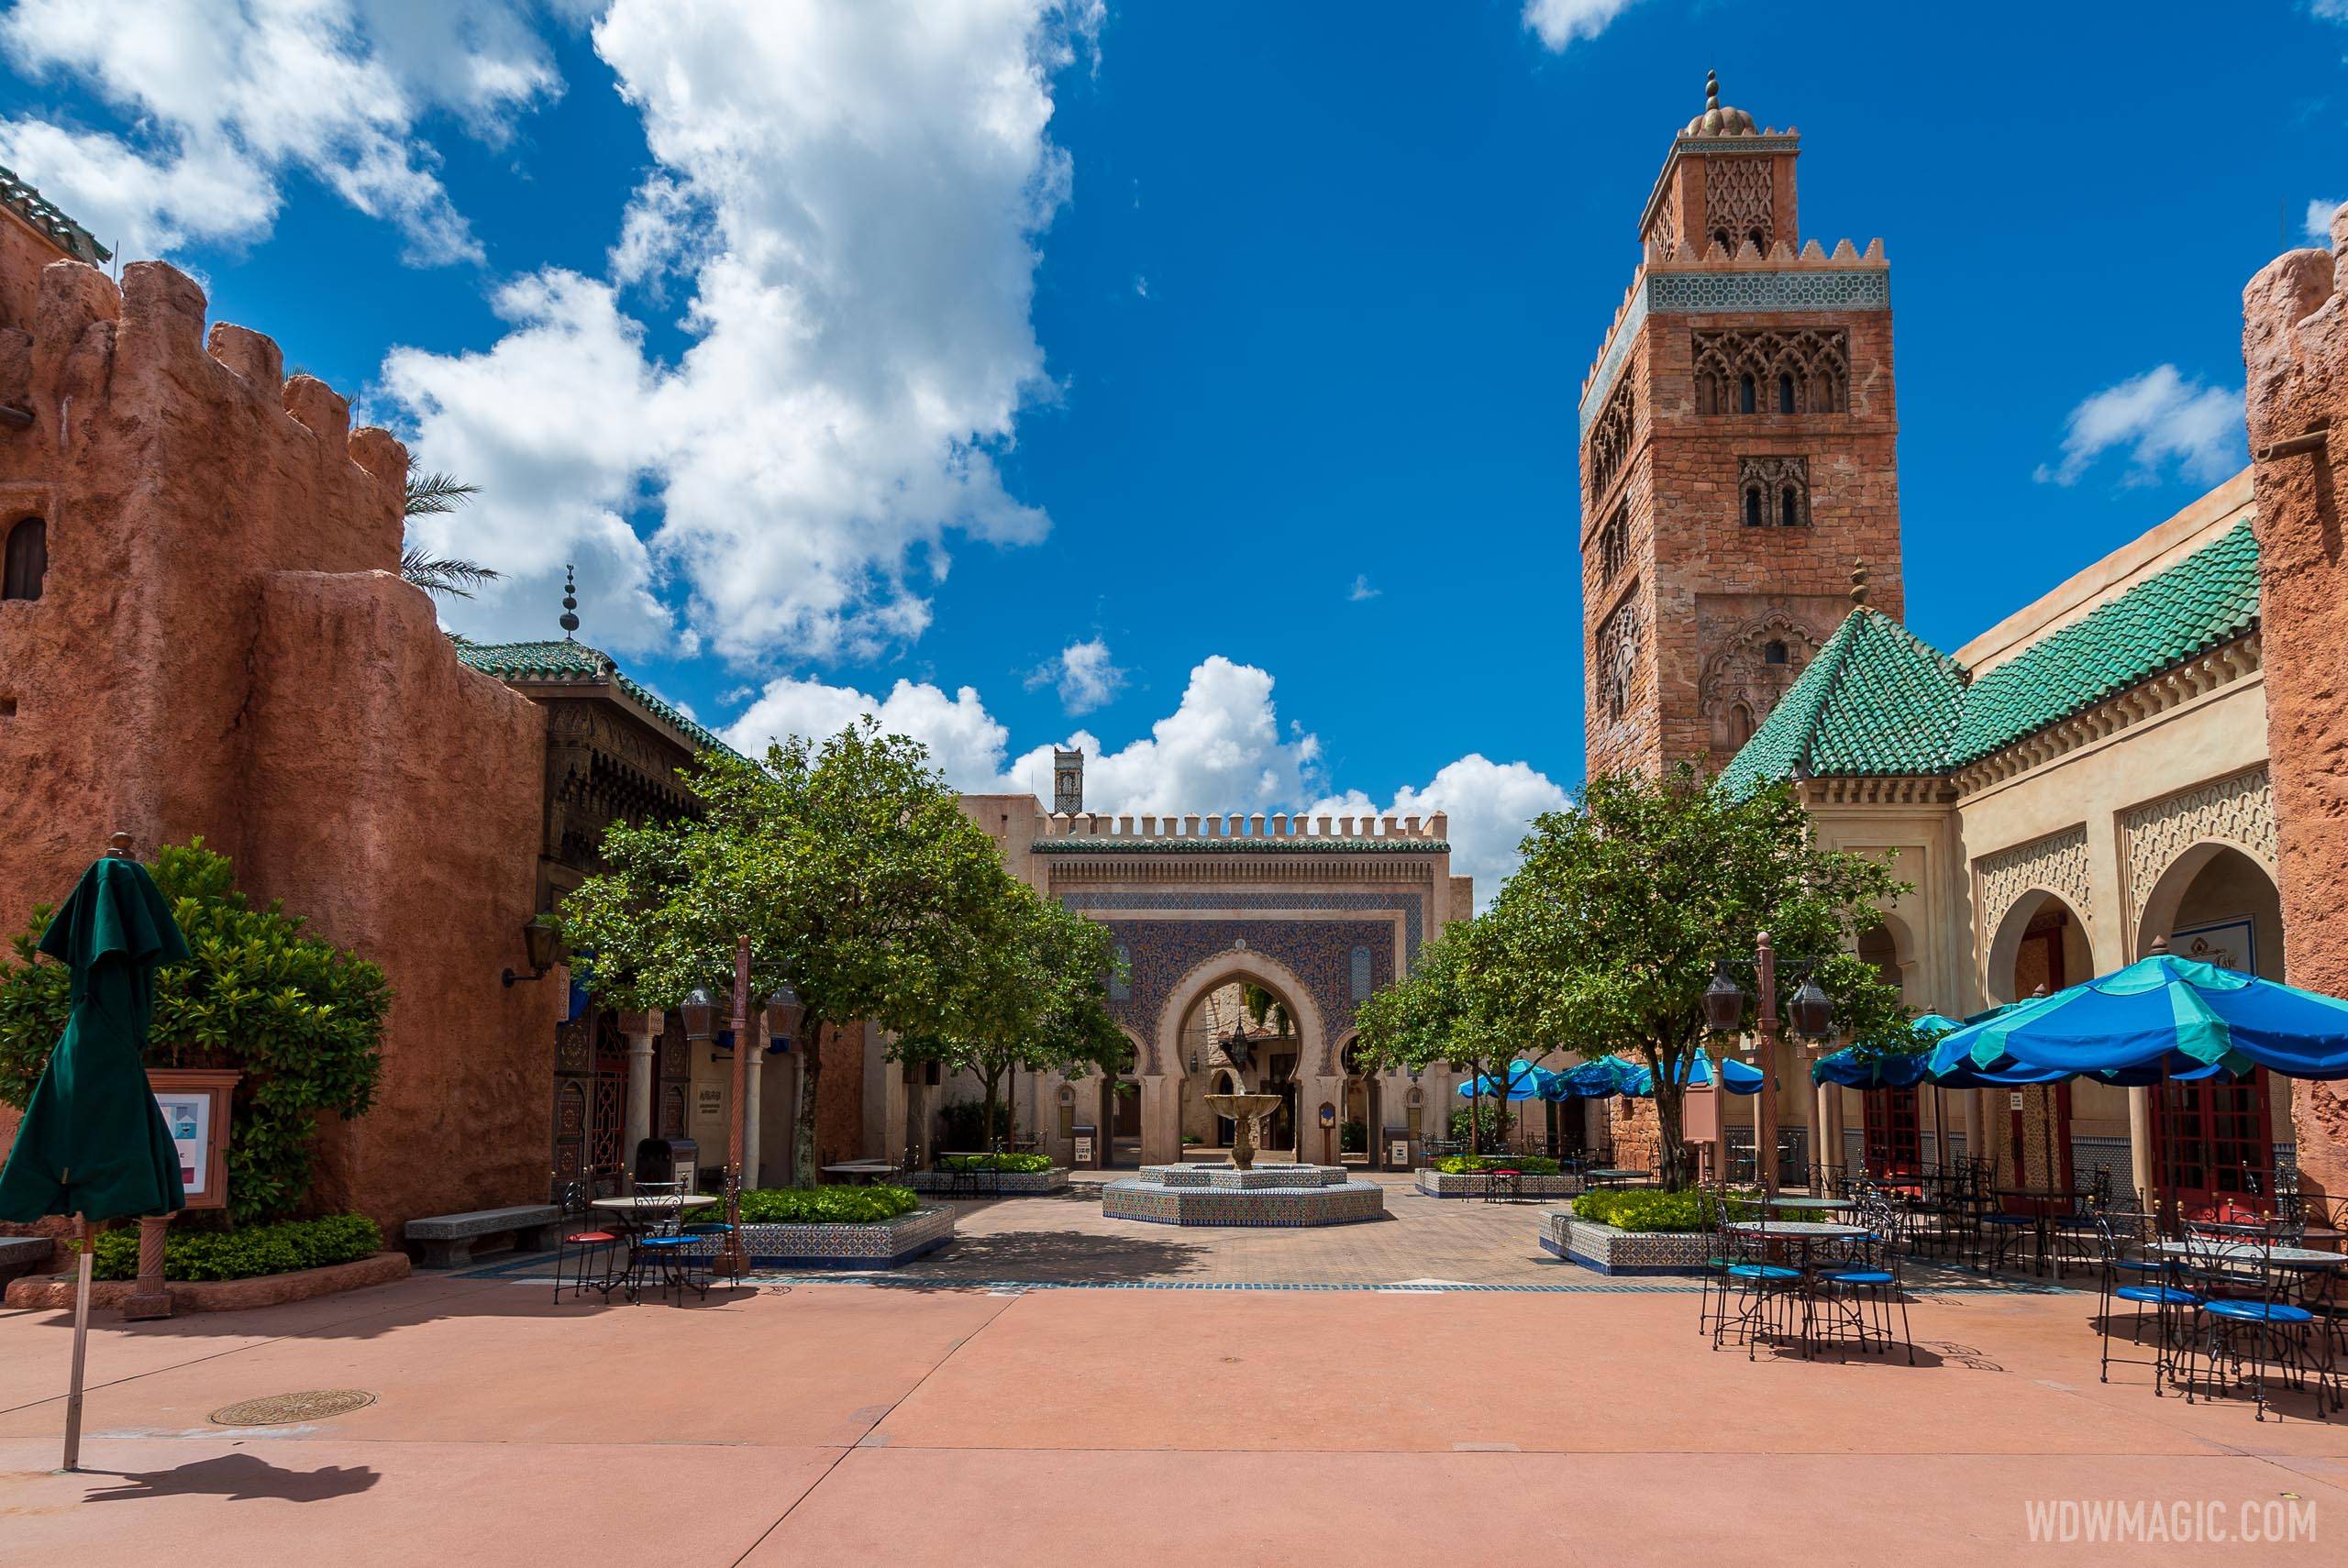 New water-side restaurant coming to Epcot's Morocco Pavilion?